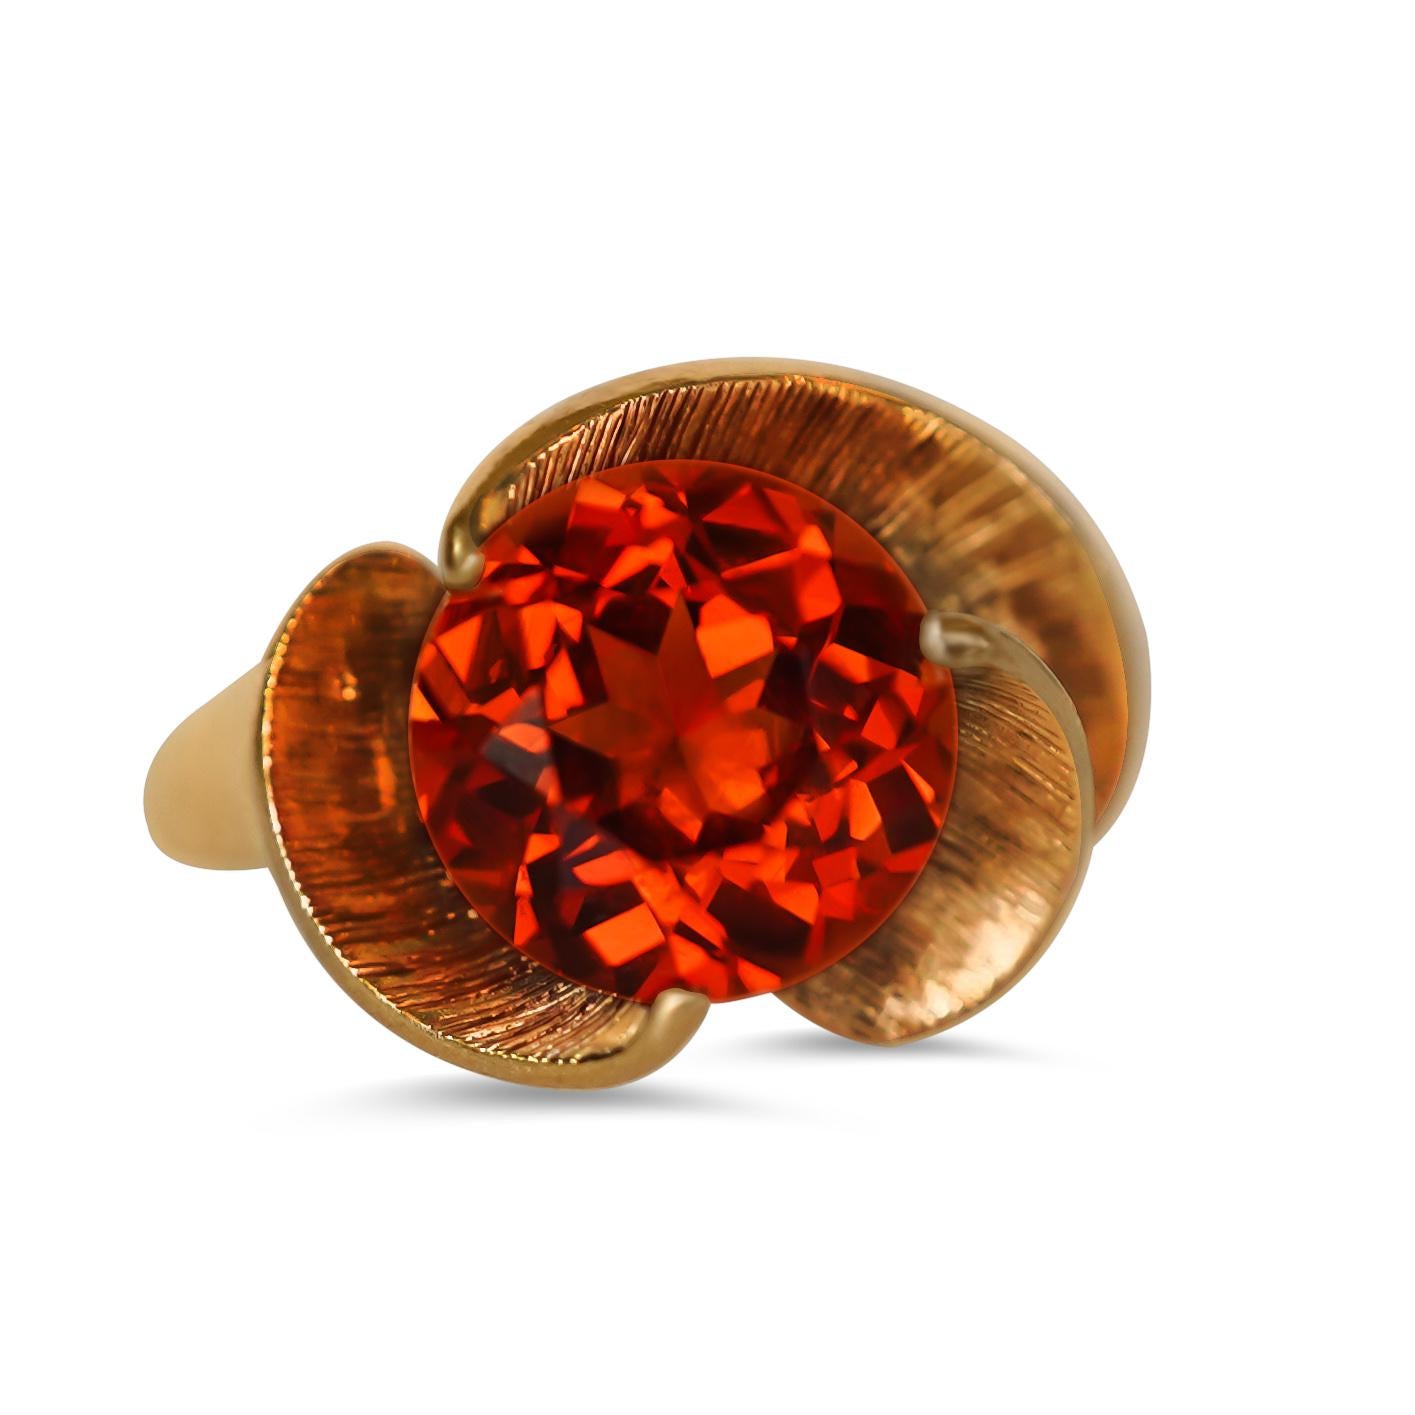 A flower design orange quartz topaz cocktail ring in 14k yellow gold. 
Stone Cut: round cut
Stone Clarity: eye clean
Stone color: orange red
Gemstone size: 9 mm
Ring size: 13 mm long x 16.1 mm wide, 8.5 in U.S. size.
Inner ring circumference: